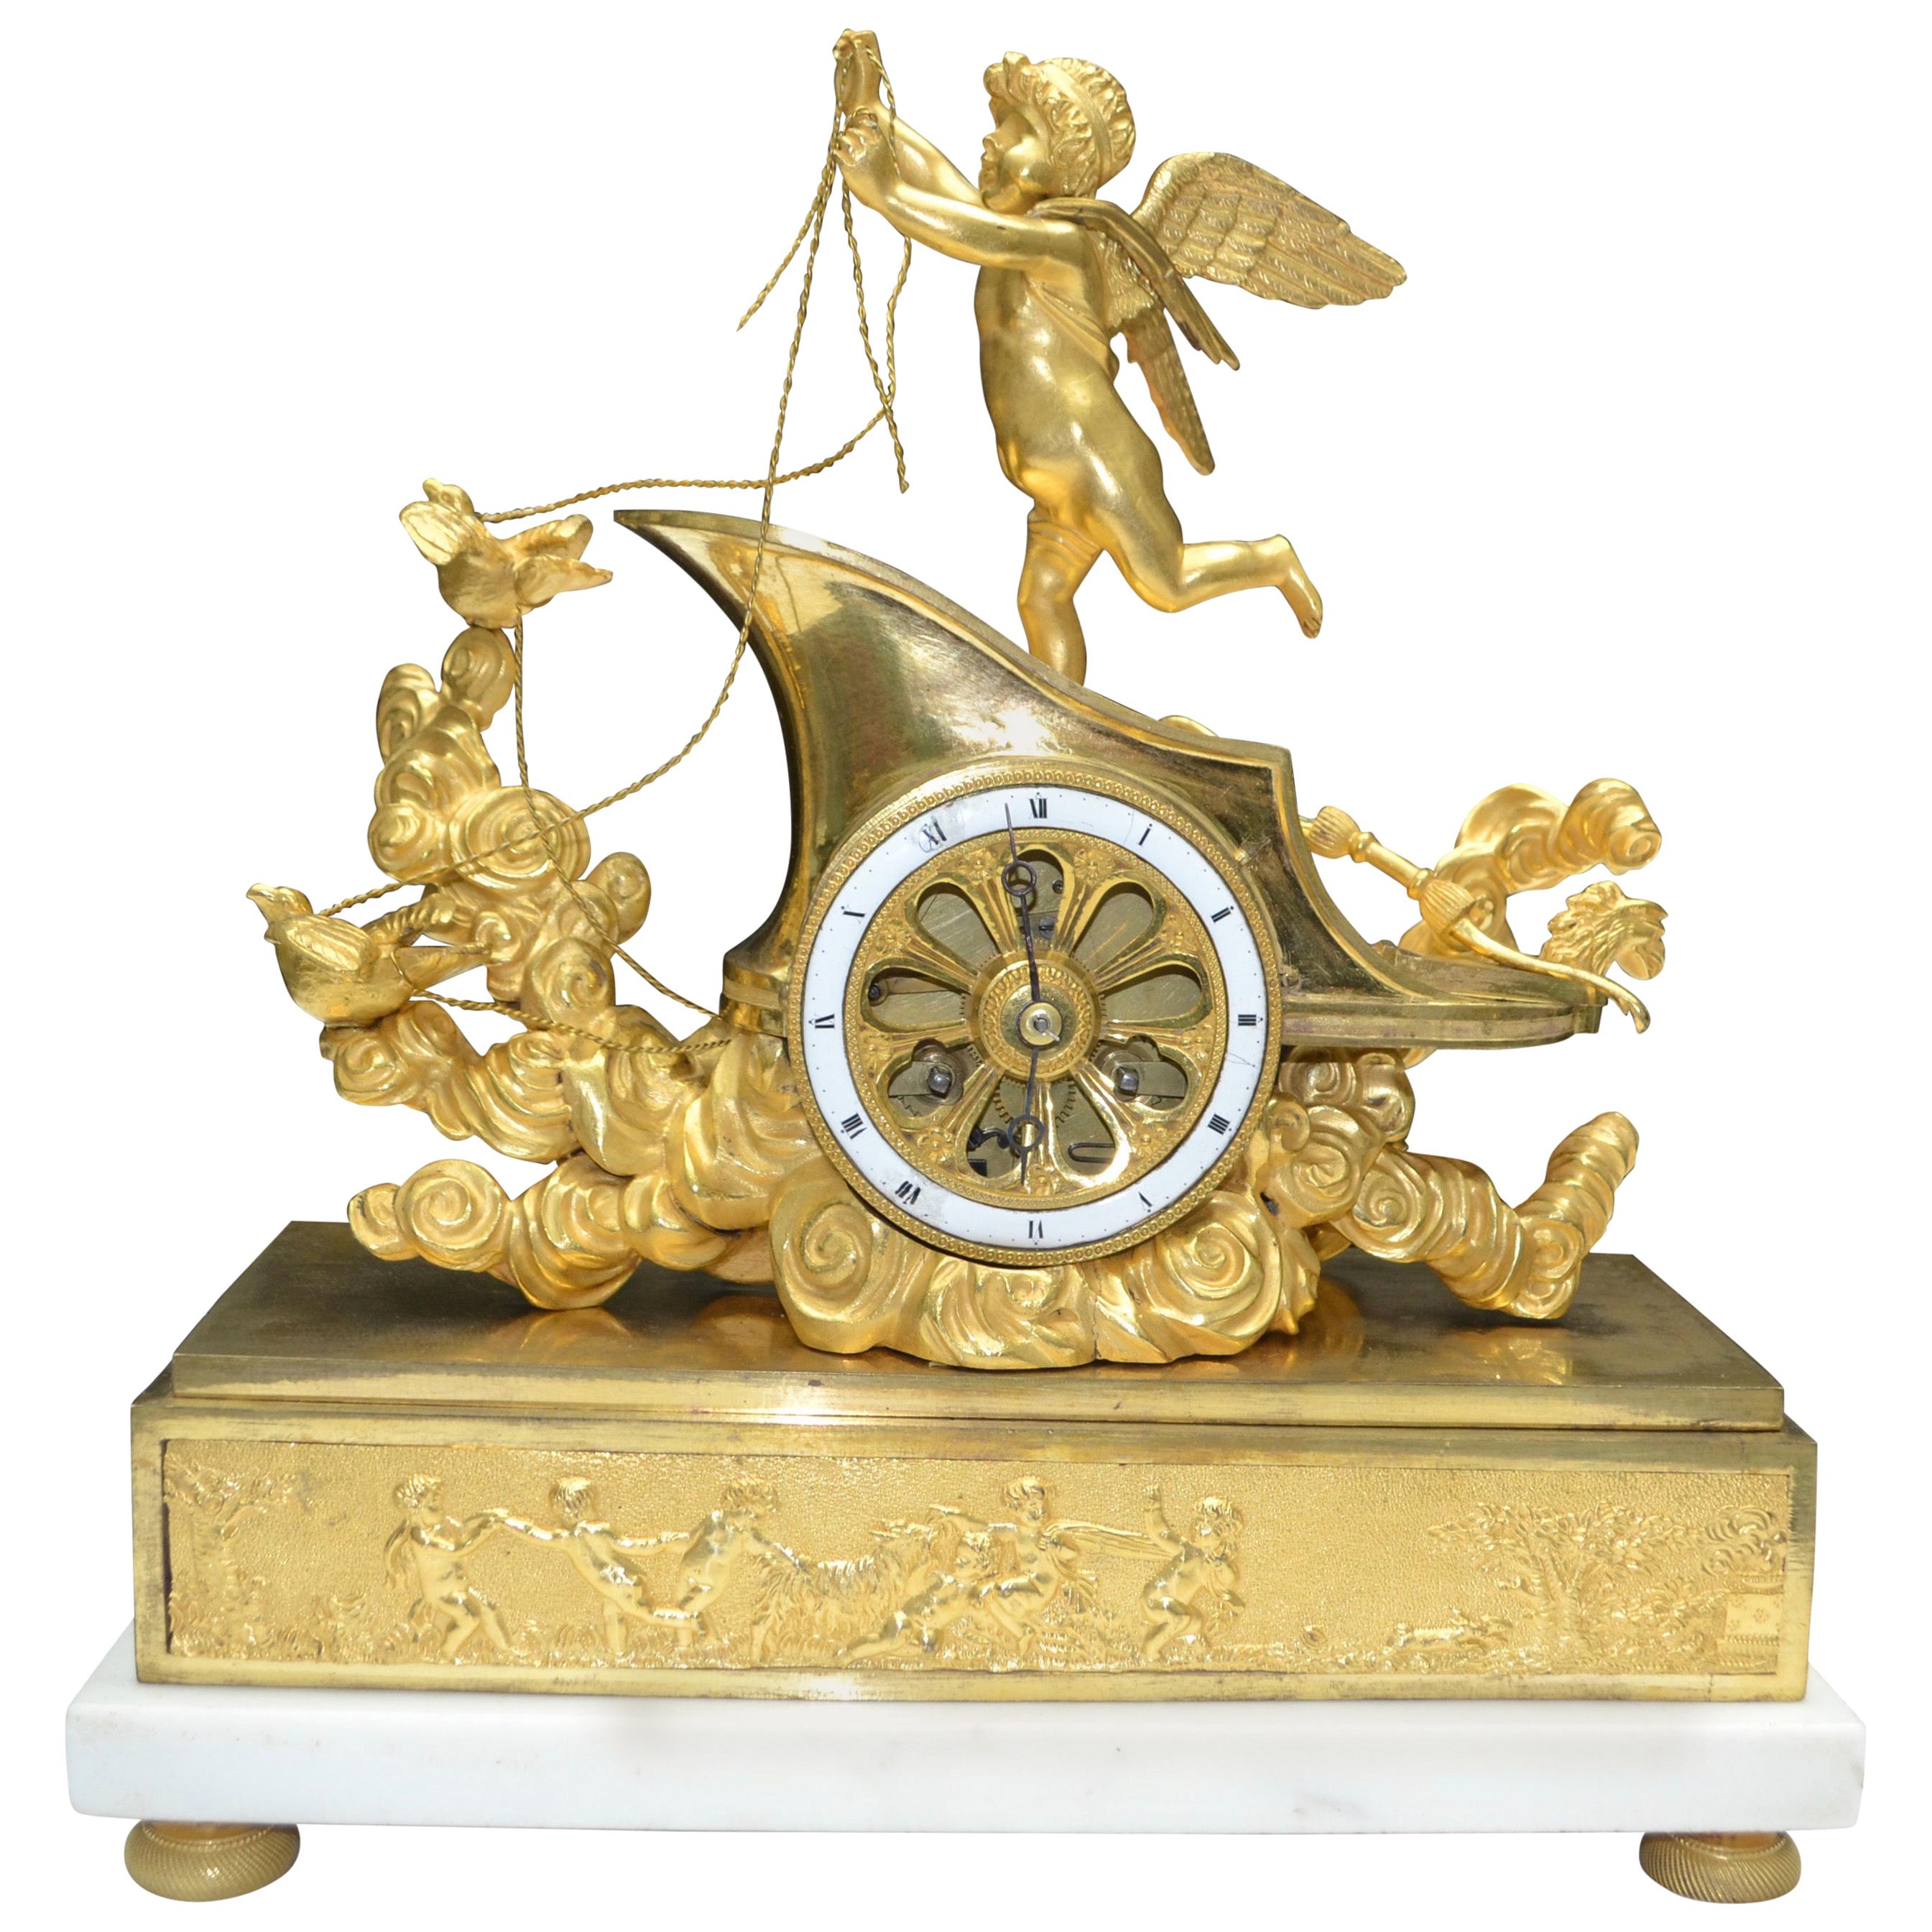 Period French Empire Mantle Clock For Sale